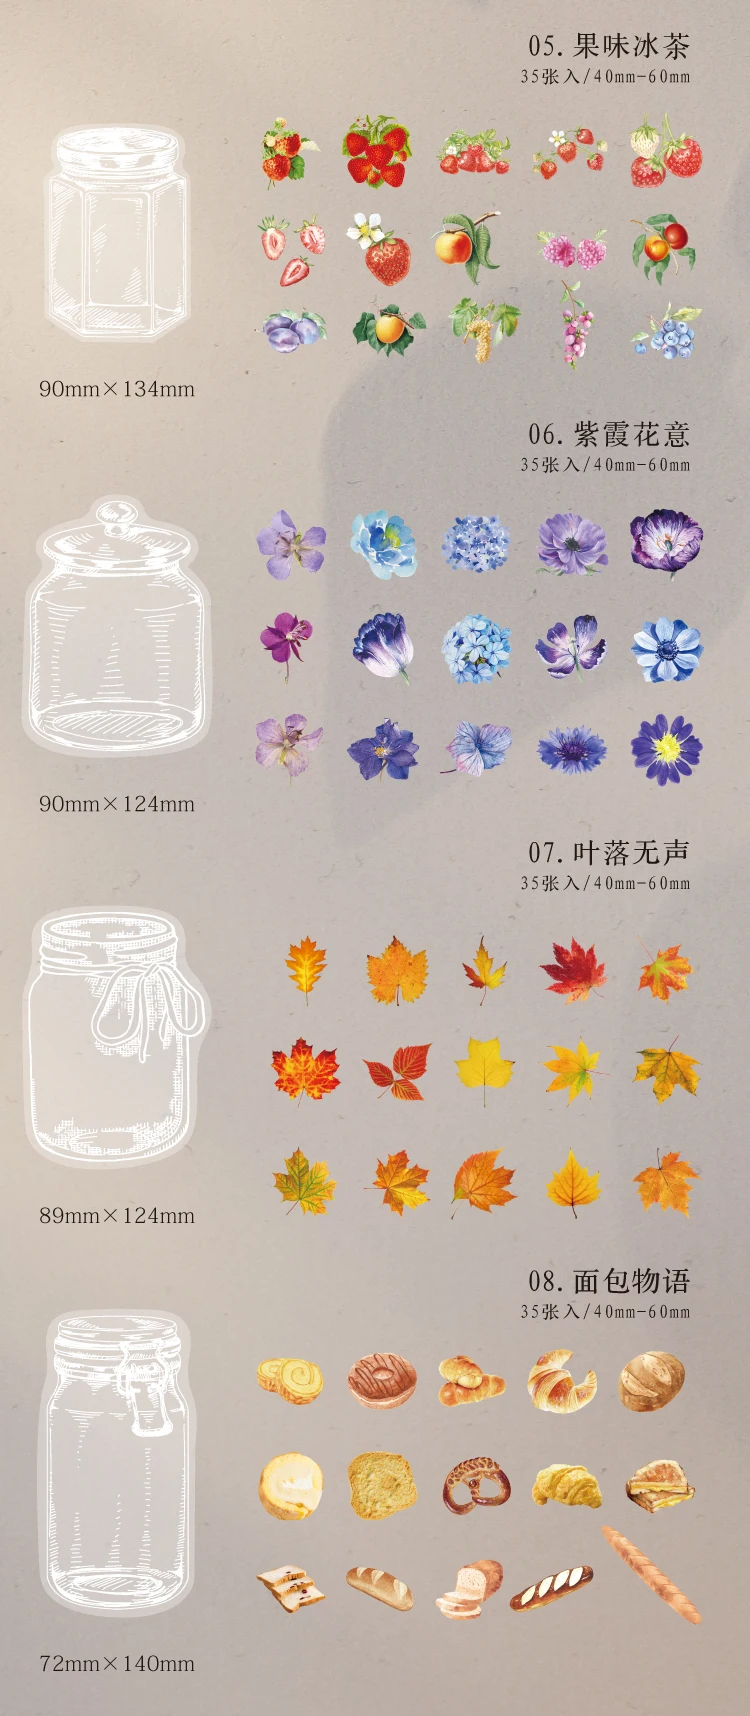 35 pcs Butterfly Flowers leaf Stickers glass container PET Sticker Decorative Diary Scrapbooking accessories collage material best ink for clear stamps